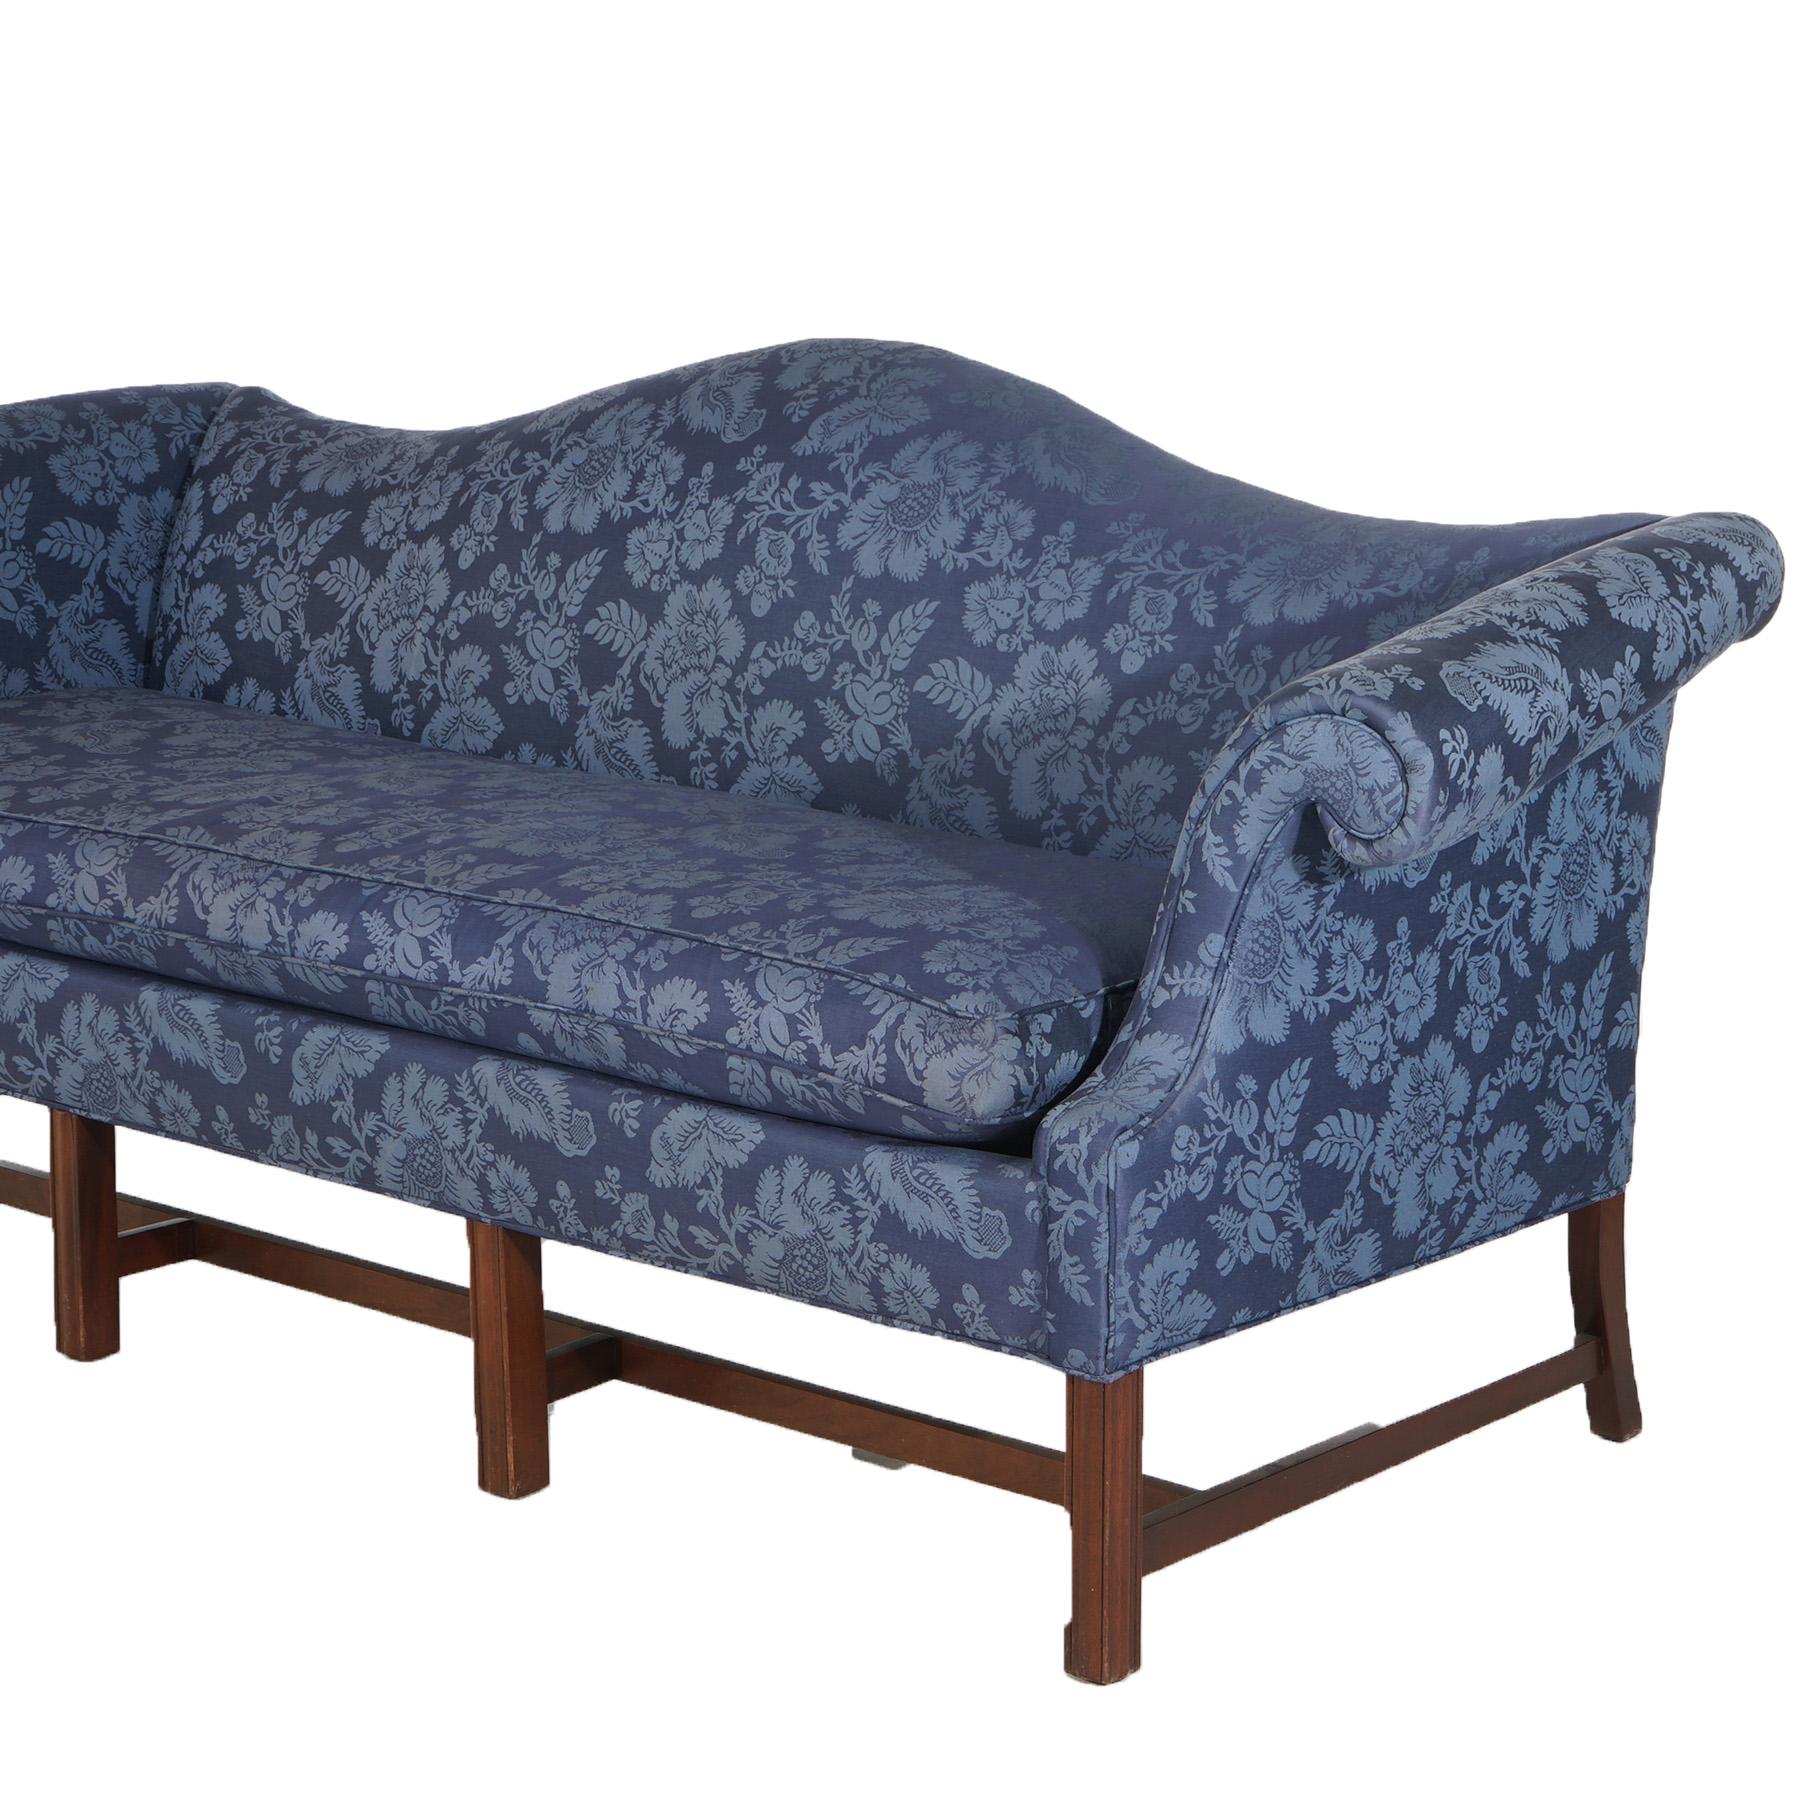 20th Century Antique Chippendale Camelback Sofa with Scroll Arms, Blue, C1930 For Sale